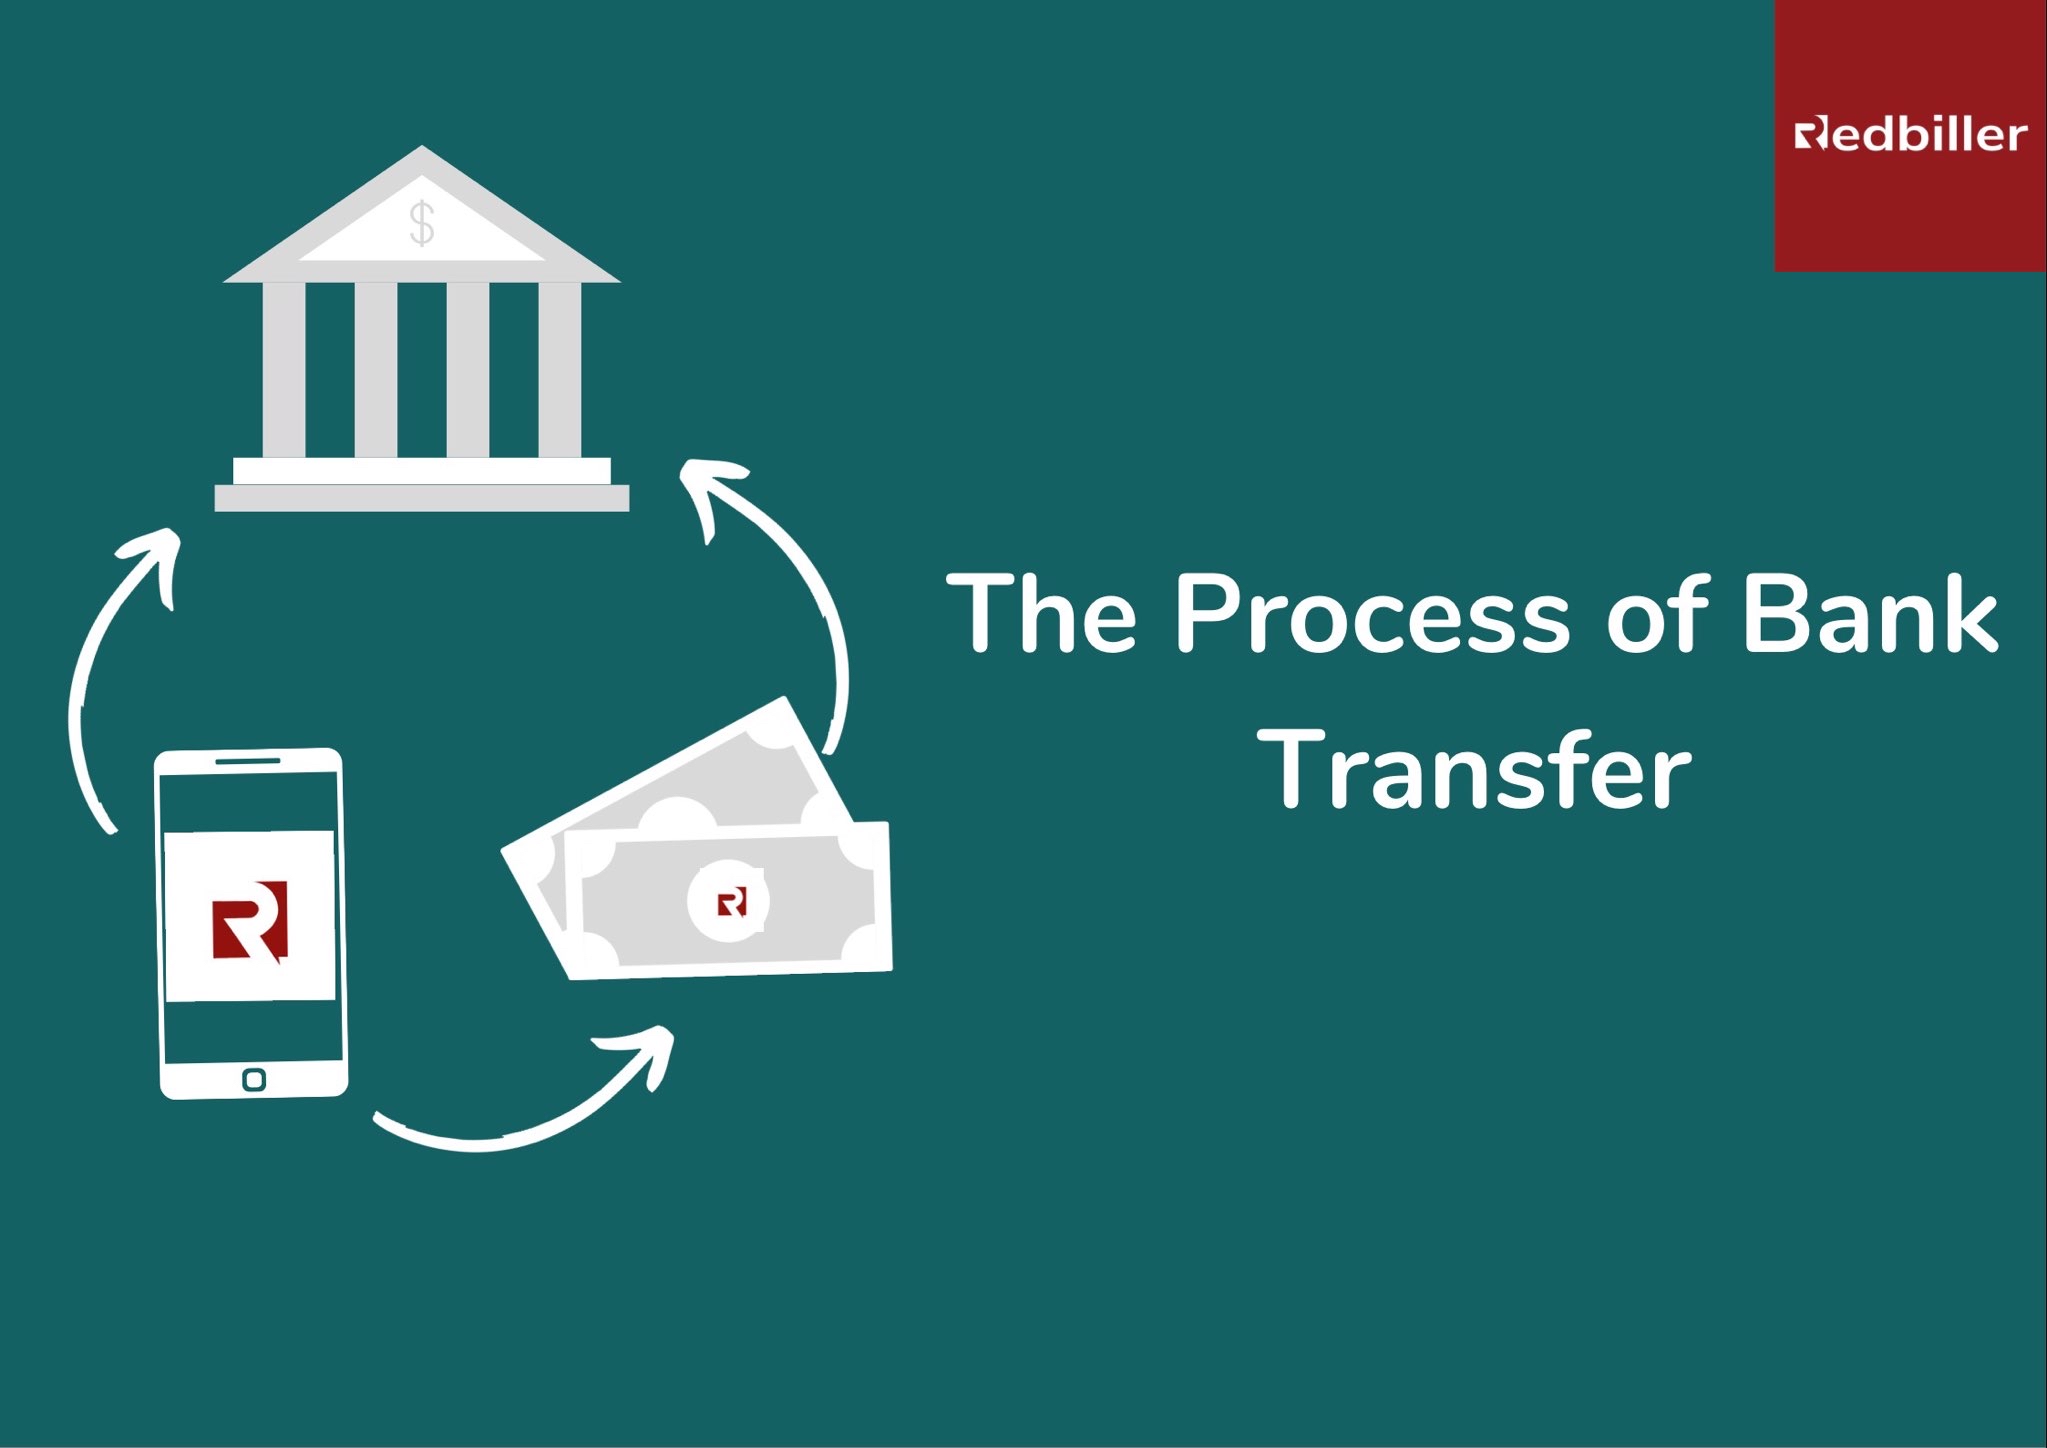 The Process of Bank Transfer